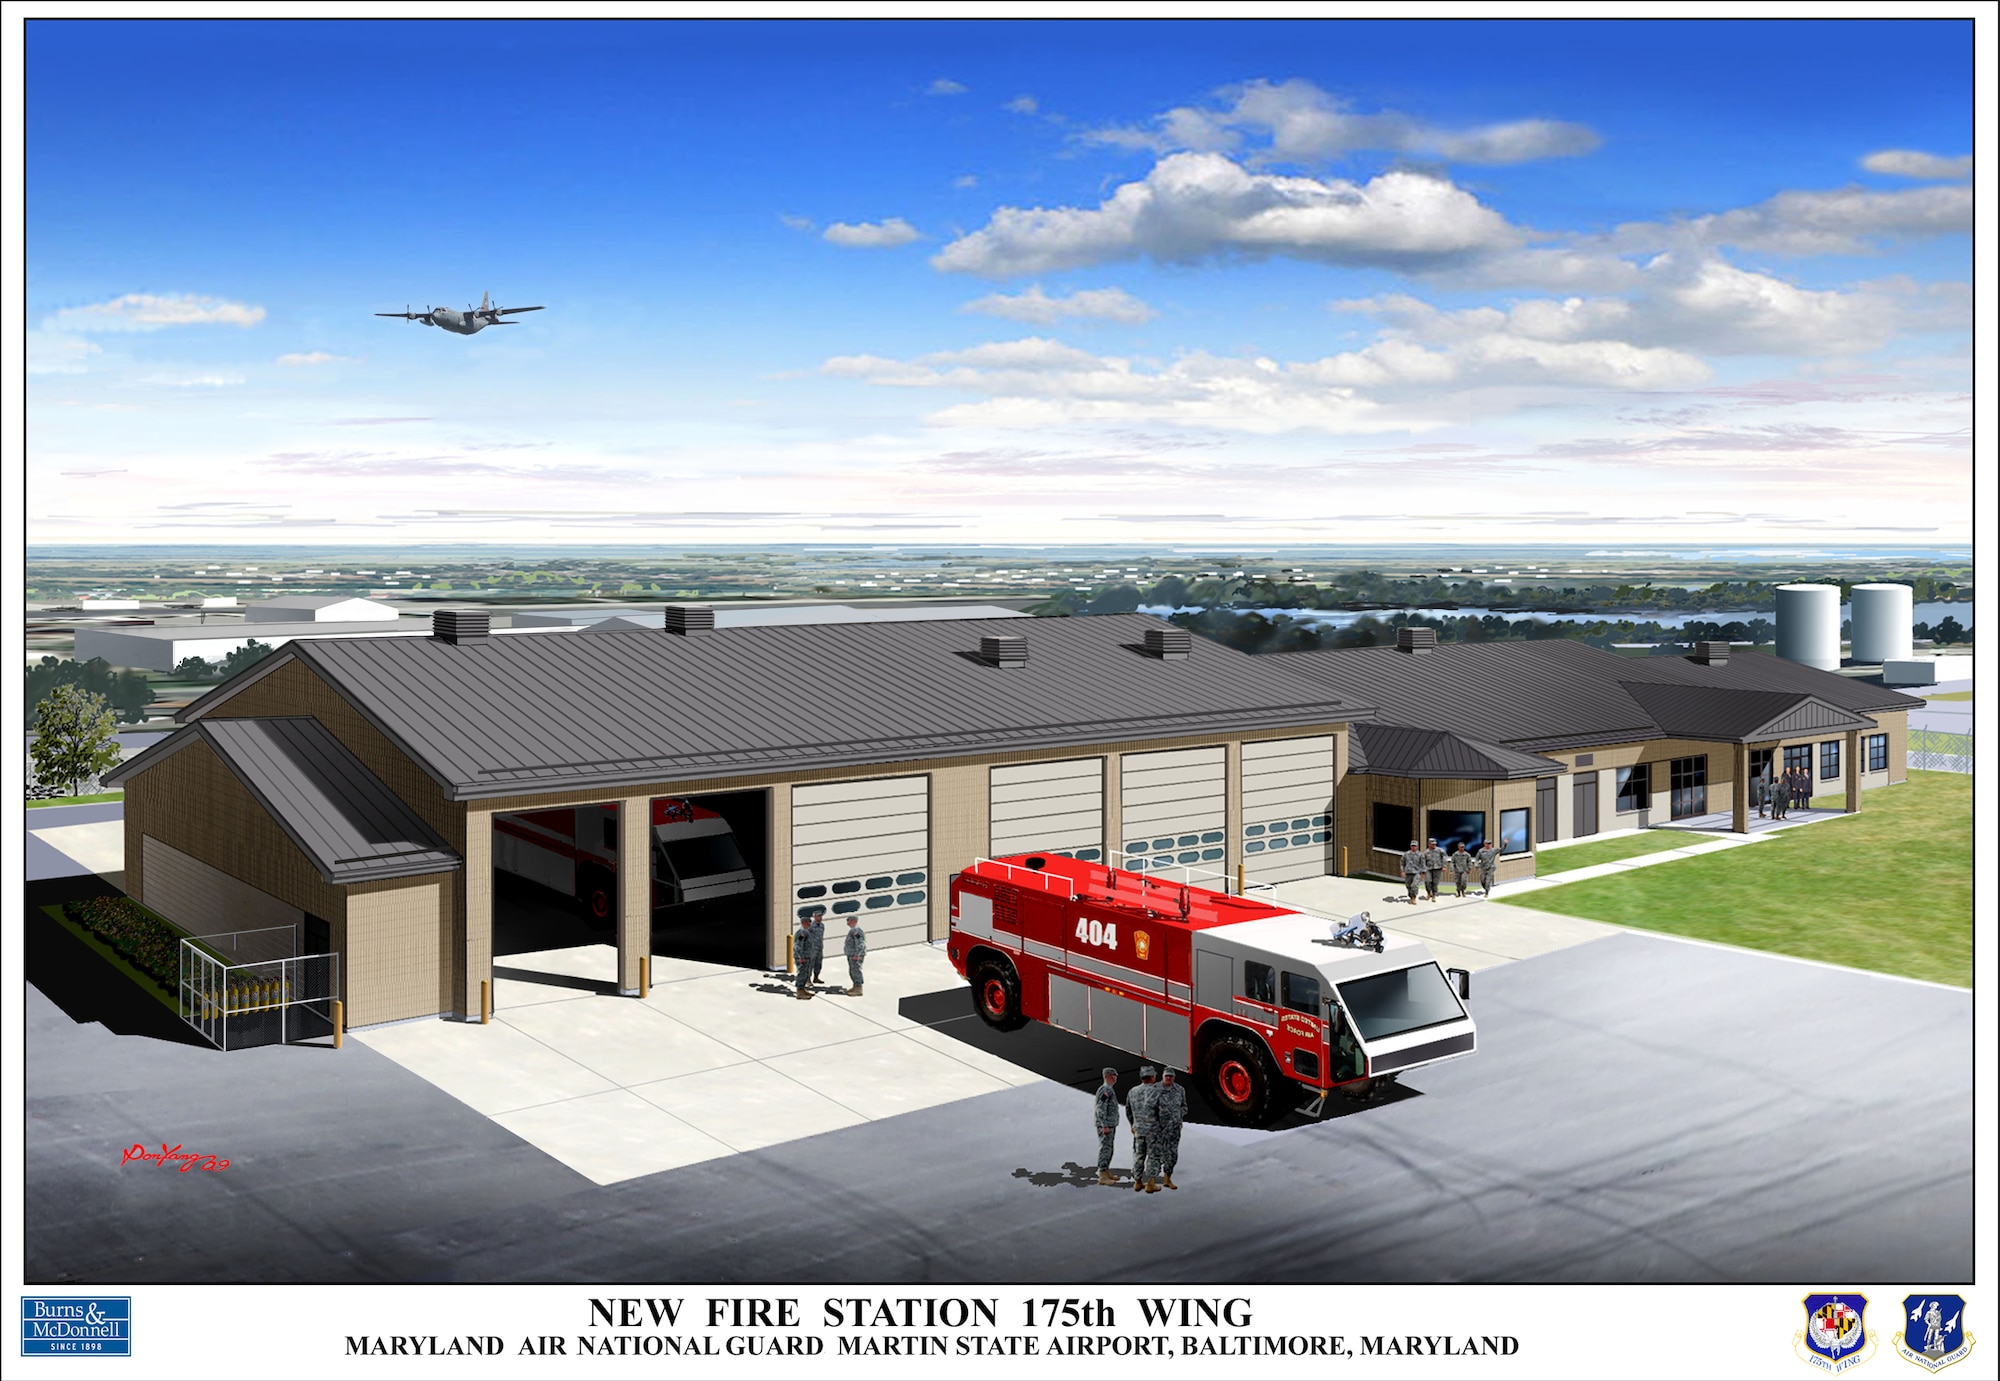 Artist rendering of the future 175th Wing Fire Department on Warfield Air National Guard Base, Baltimore, Md.  